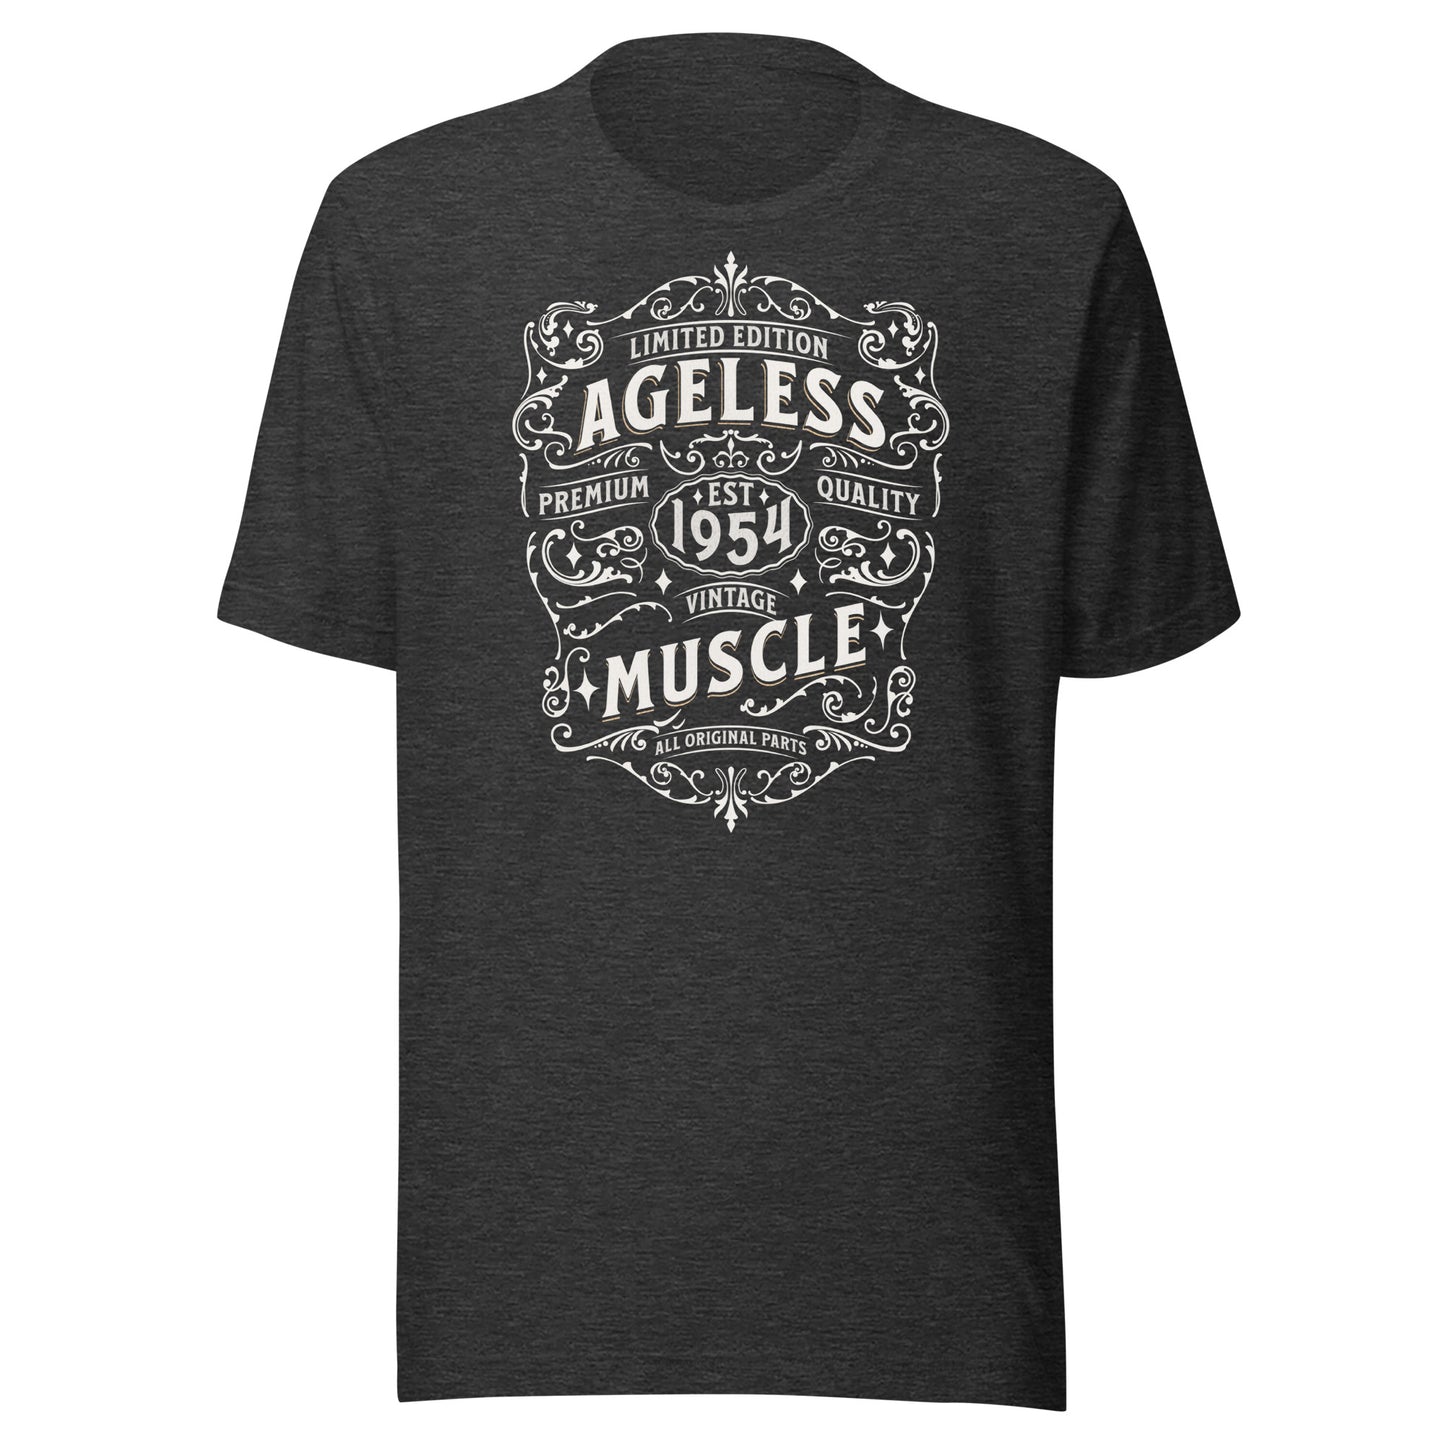 Ageless Muscle 1954: Limited Edition Unisex t-shirt